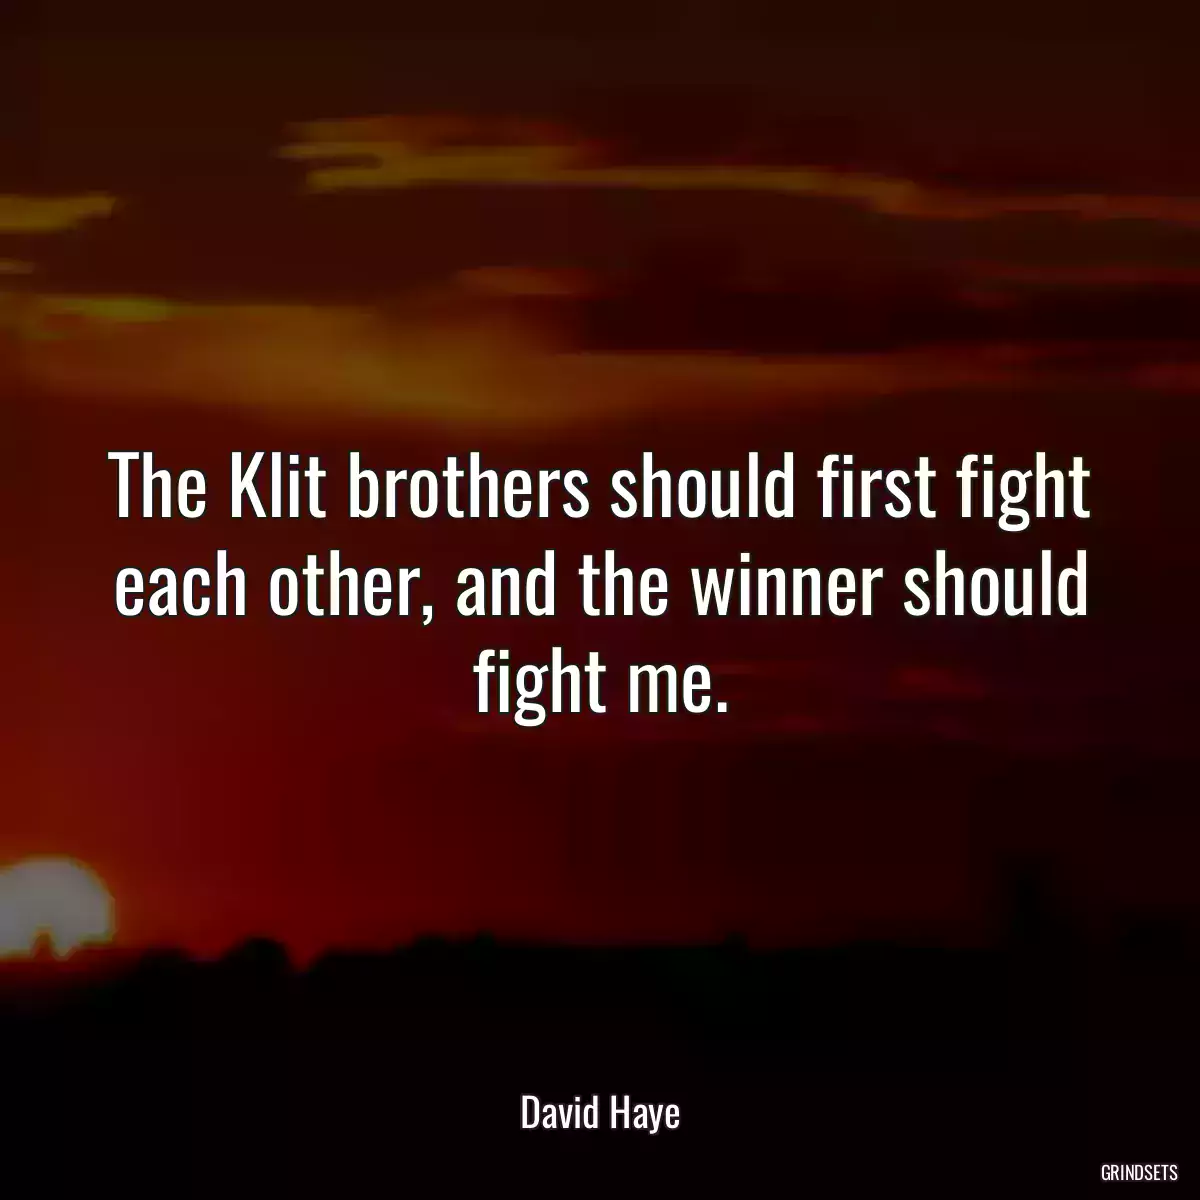 The Klit brothers should first fight each other, and the winner should fight me.